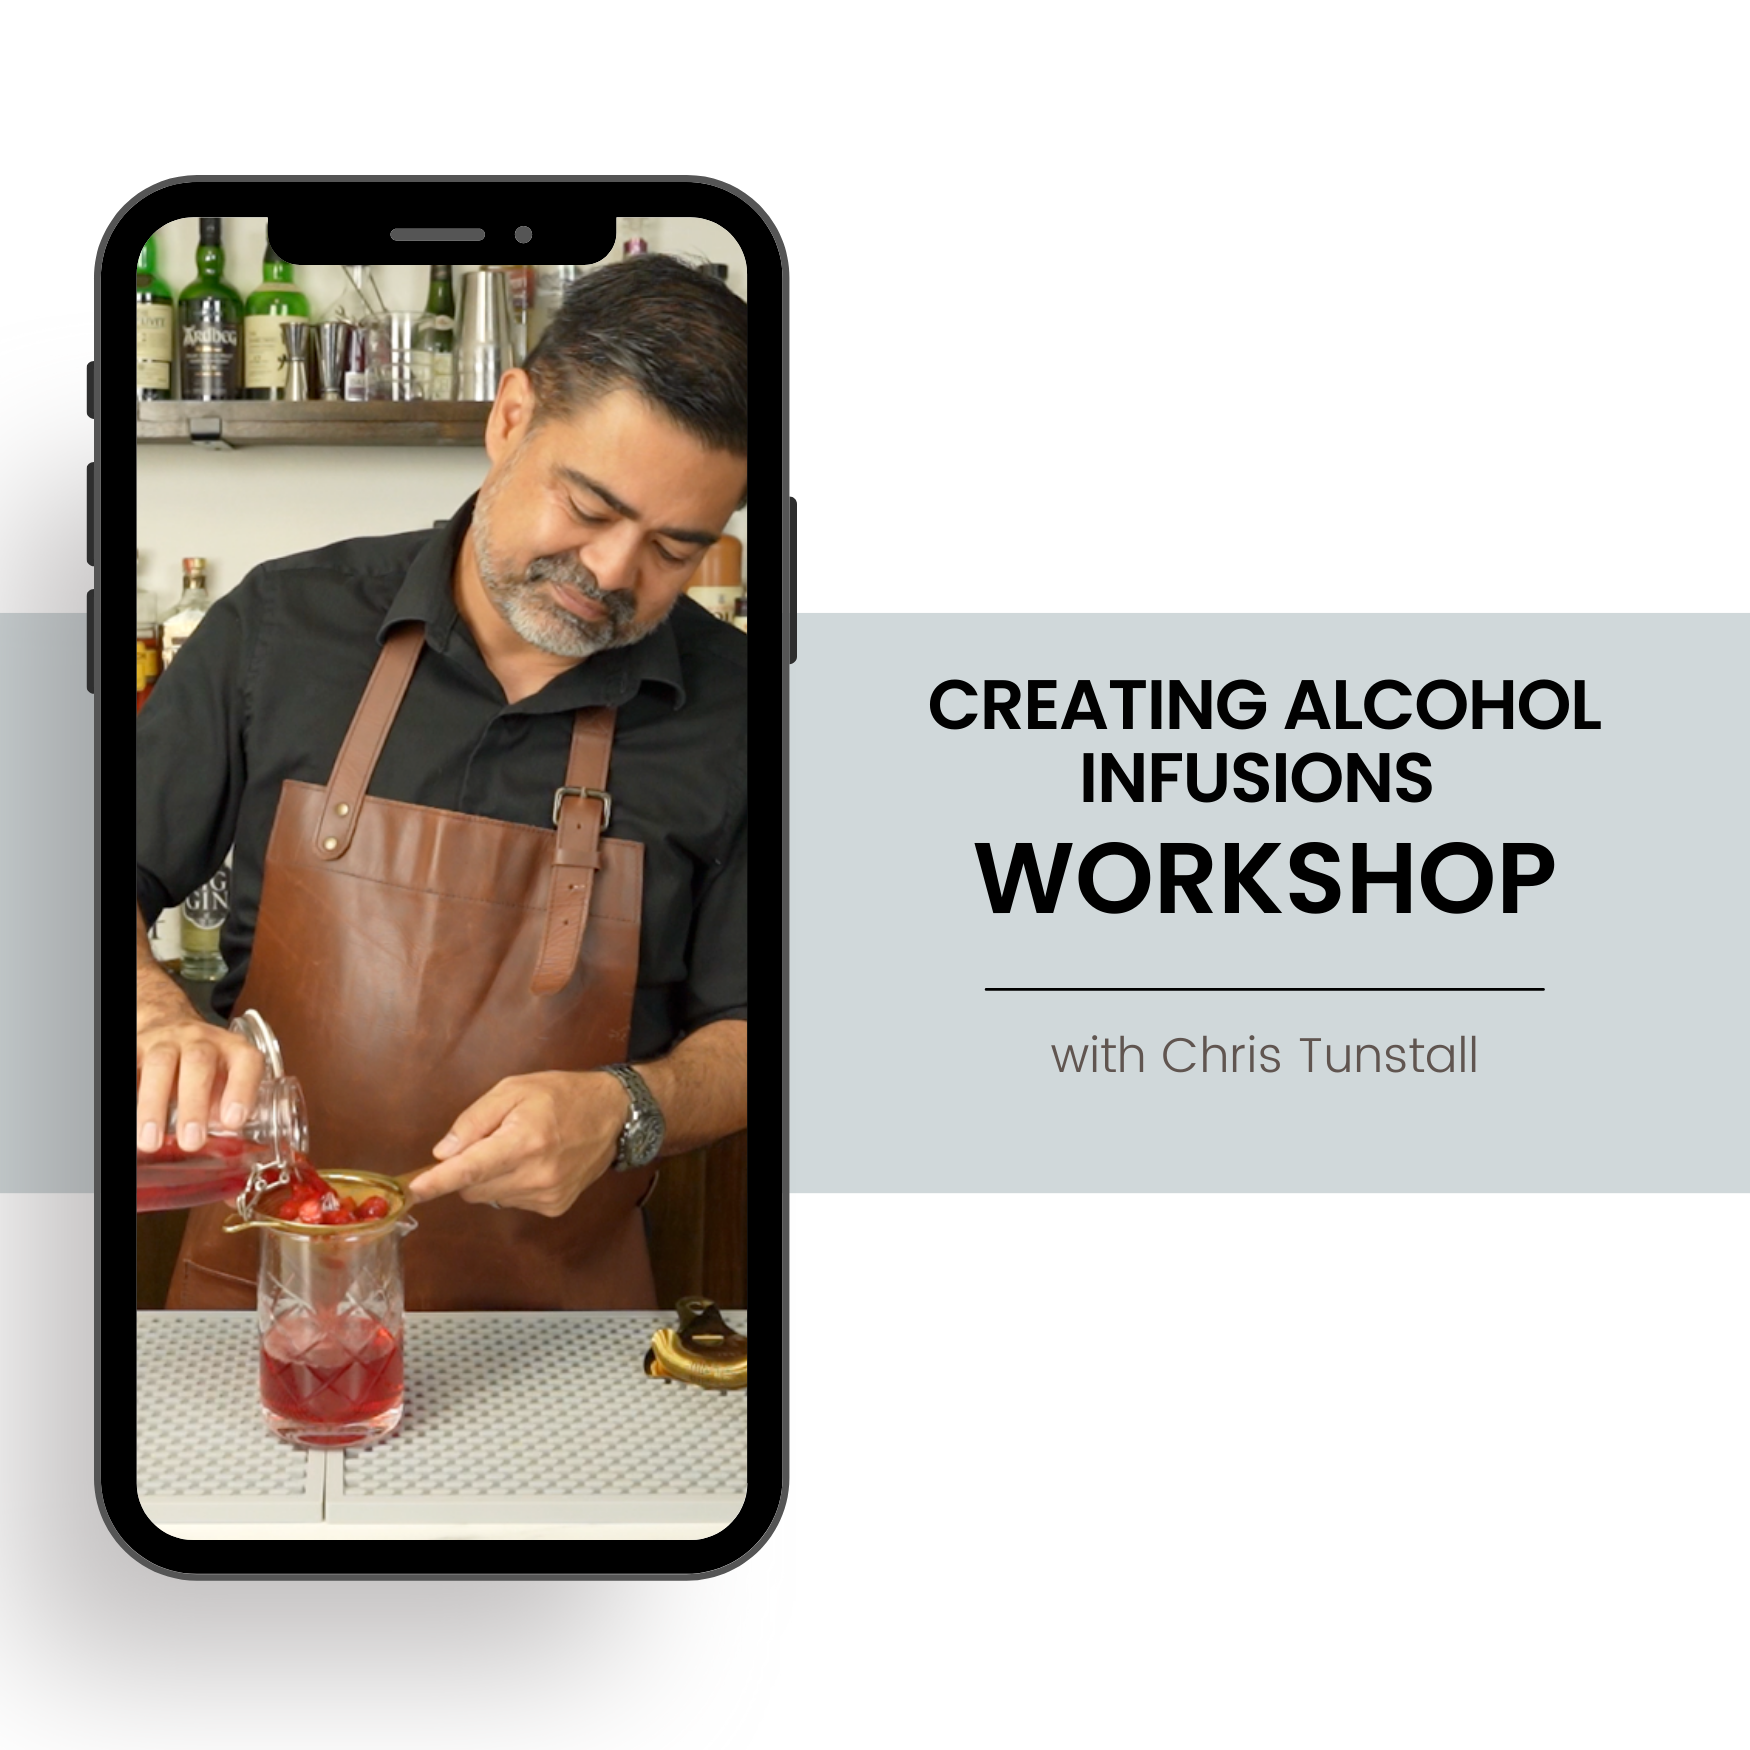 Creating Alcohol Infusions Workshop